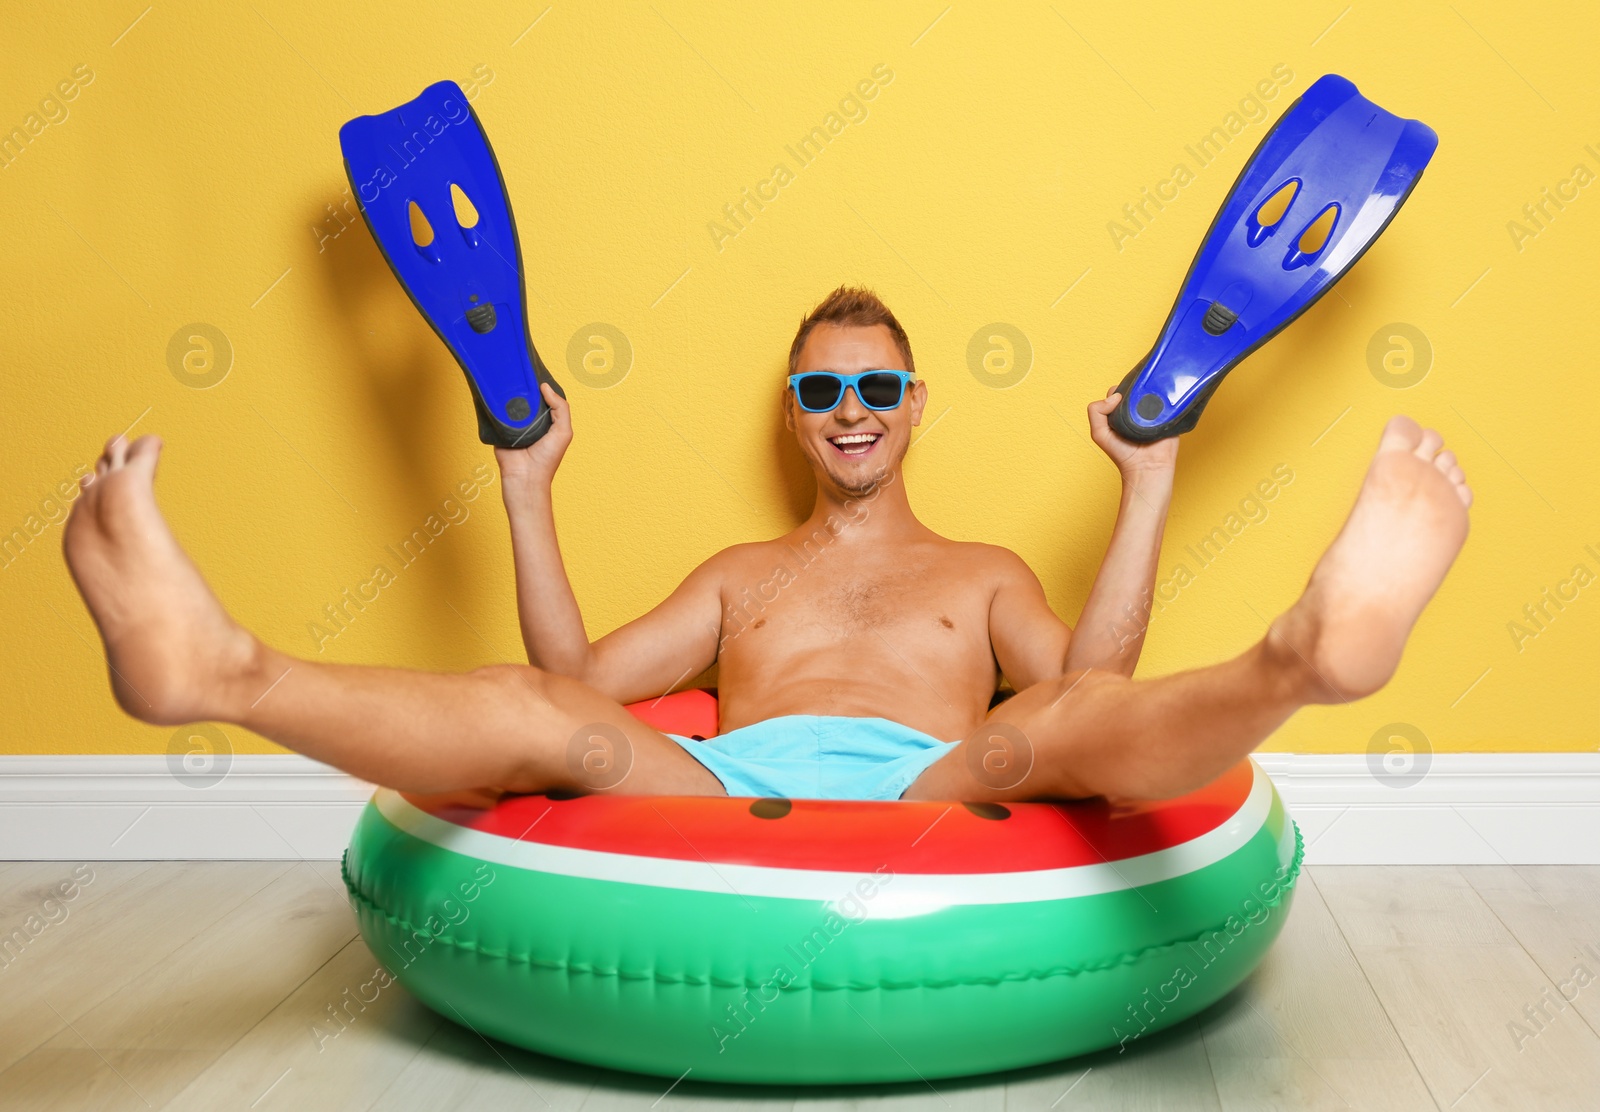 Photo of Shirtless man with inflatable ring and flippers having fun on floor near color wall